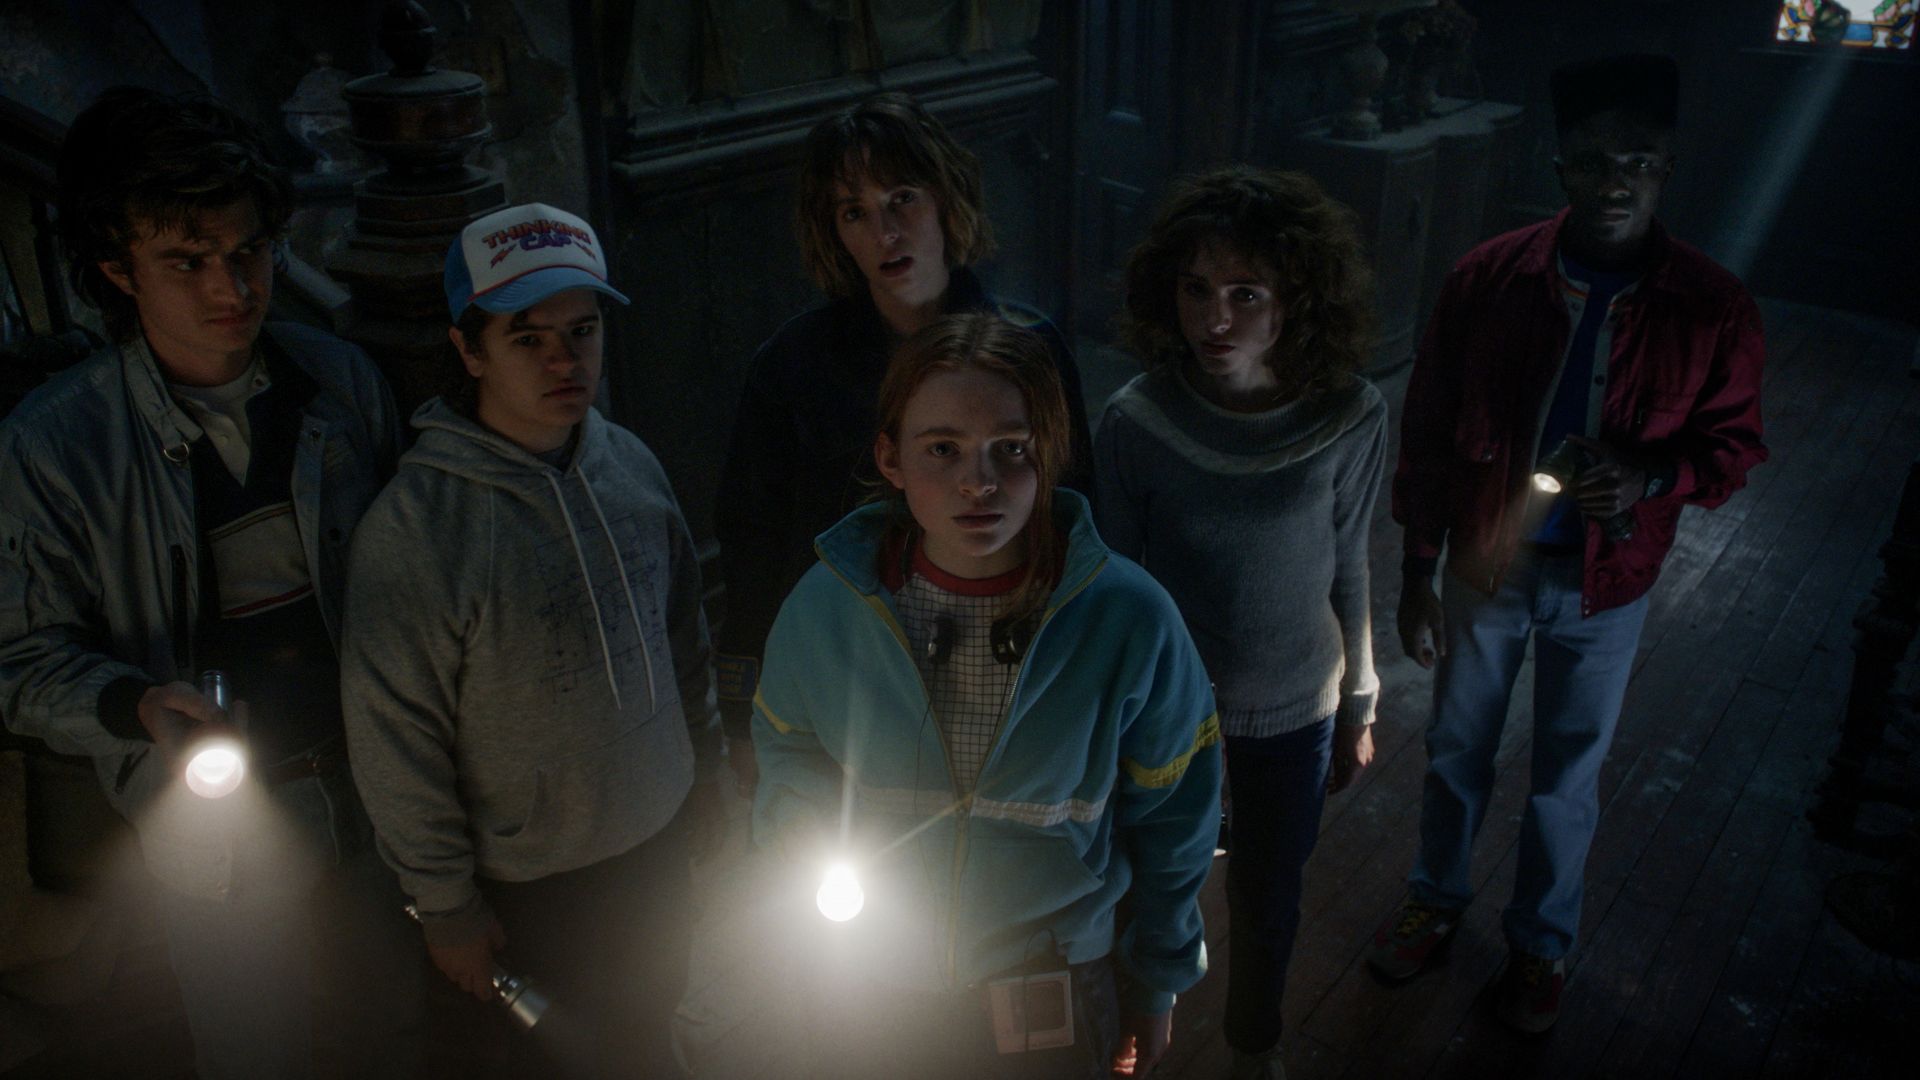 Stranger Things season 4 reviews say the new episodes are ambitious